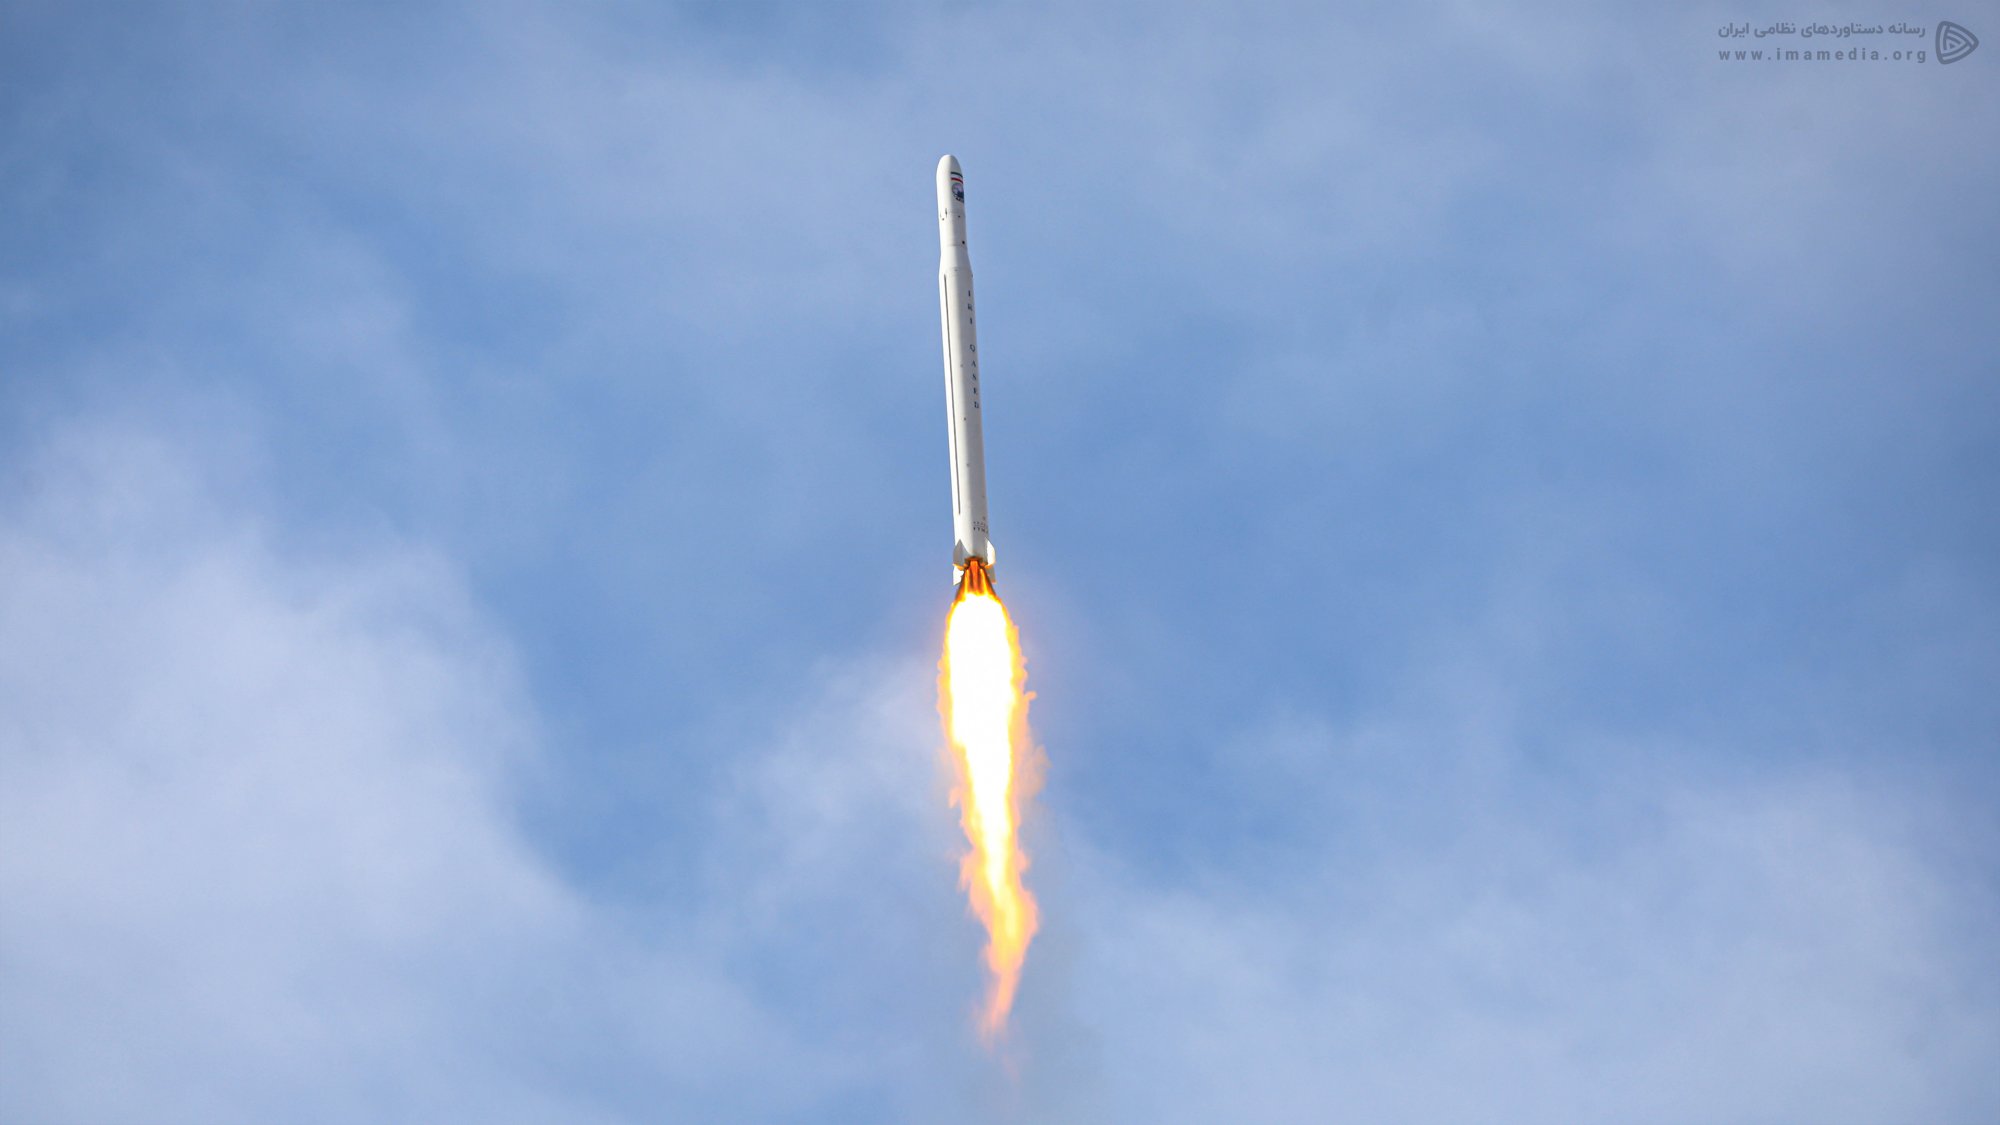 April_22,_2020_High_Quality_Images_of_Noor_Satellite_Launch_With (2).jpg